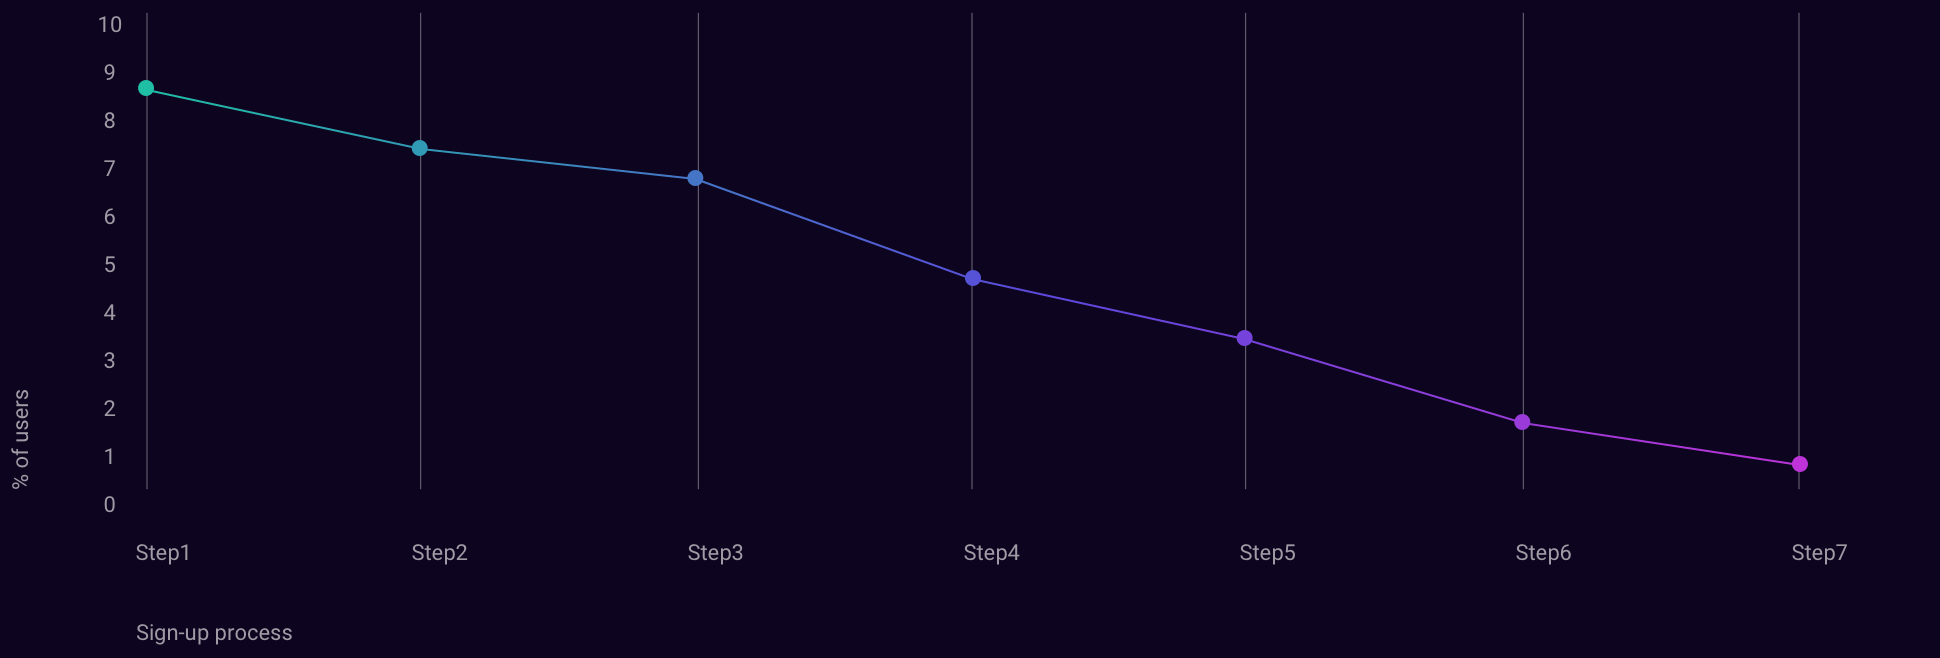 Example of a simple graph displaying drop-off rates for sign-ups in a nameless app